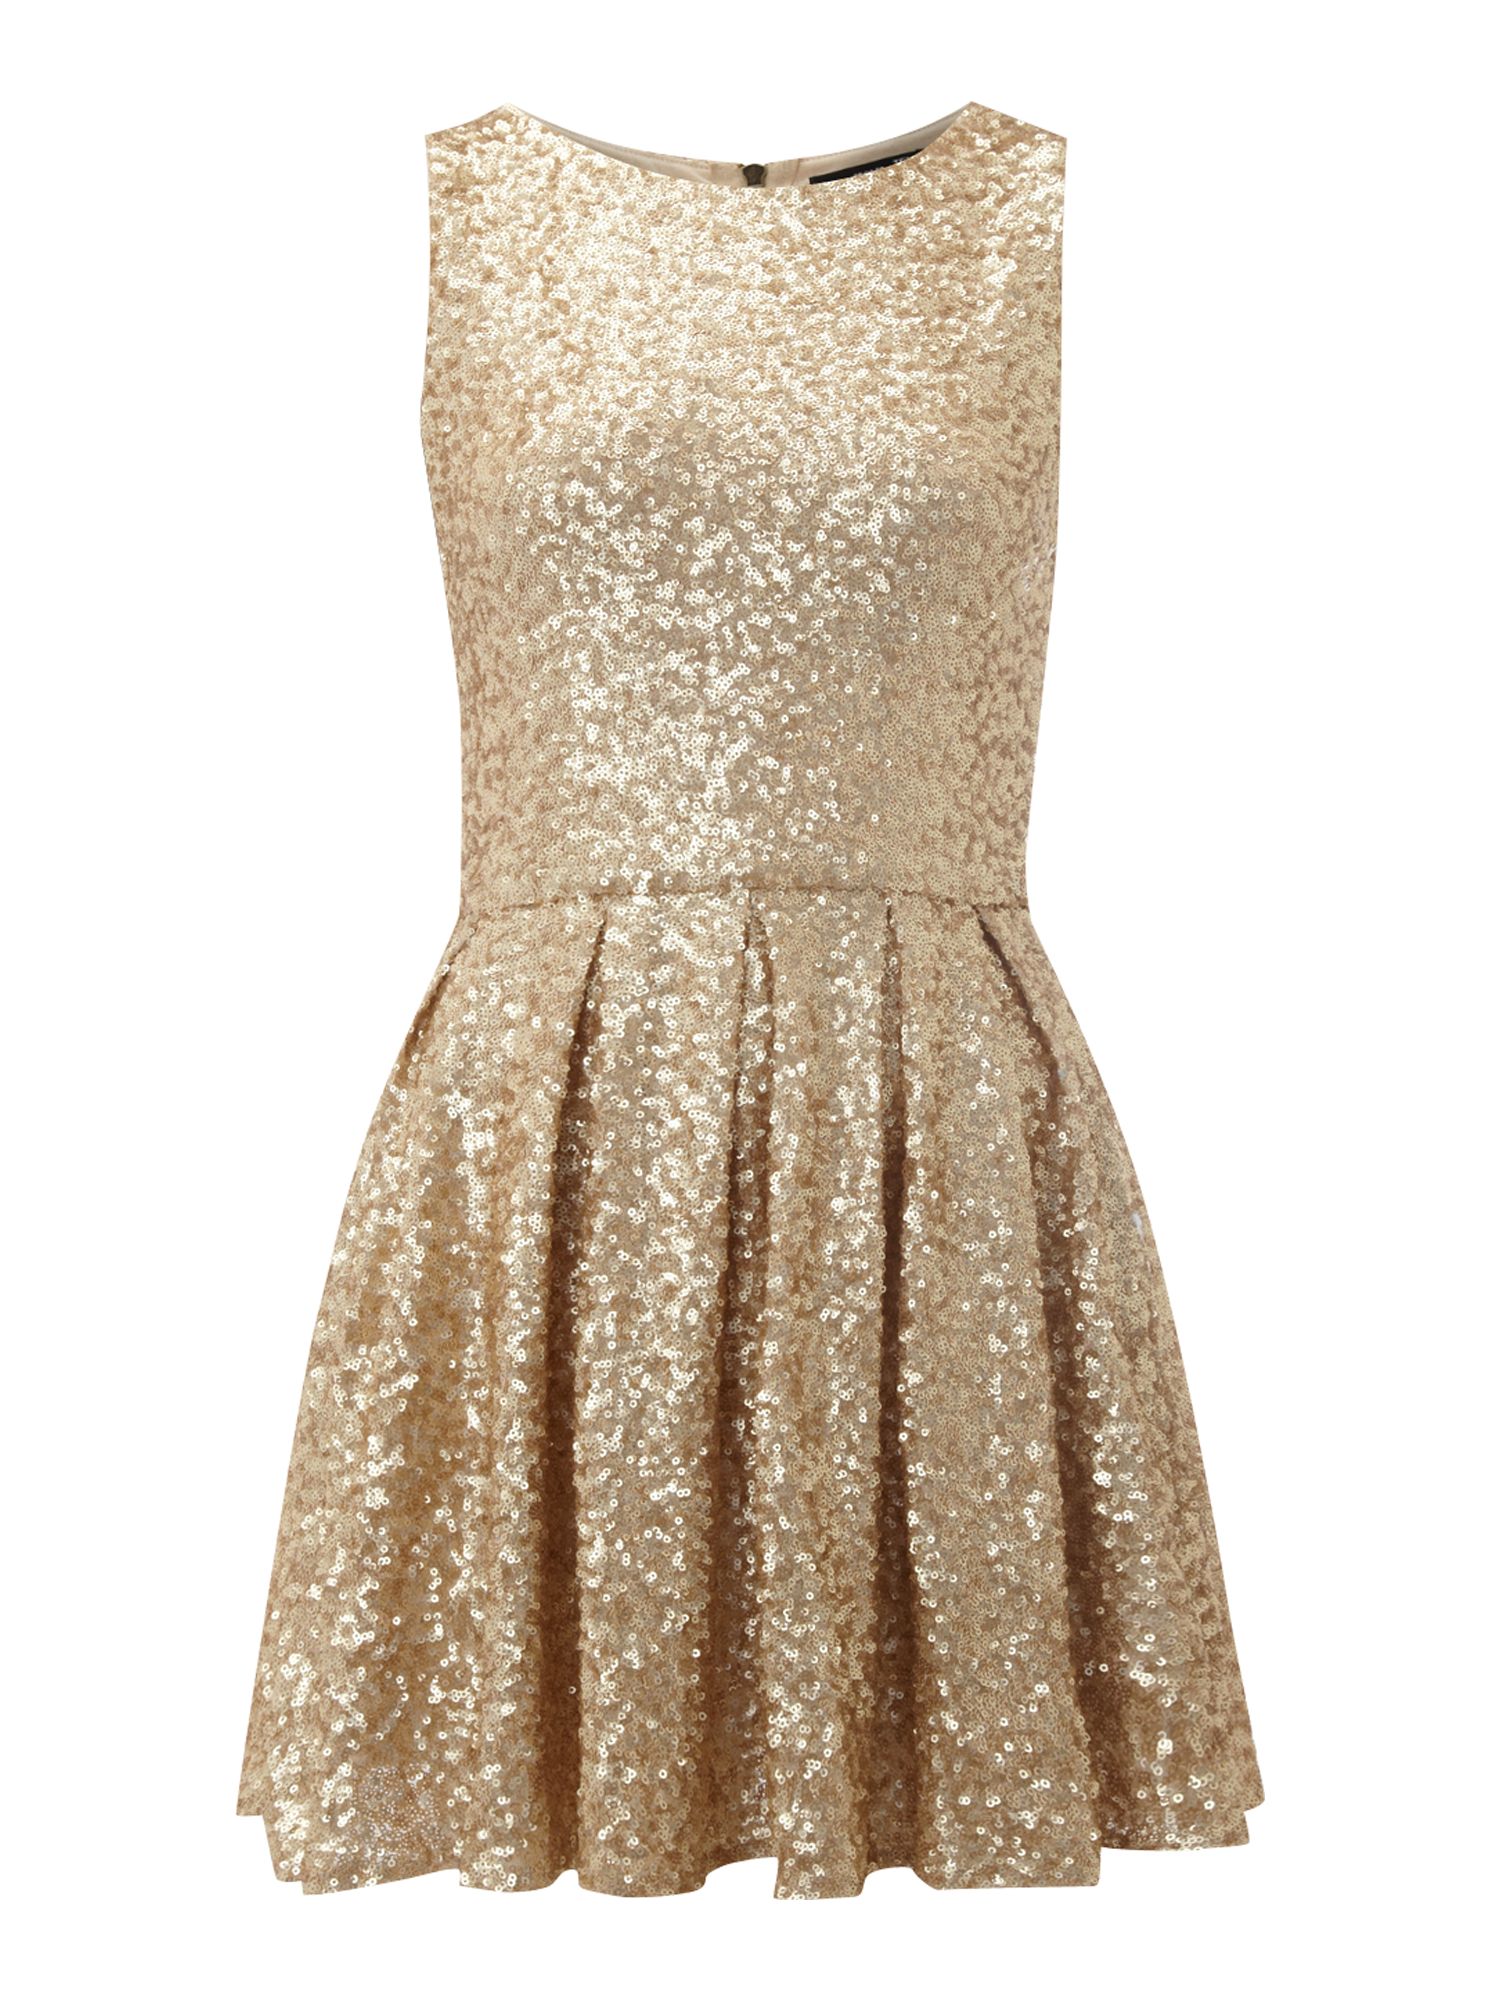 Tfnc london All Over Fit and Flare Sequin Dress in Metallic | Lyst